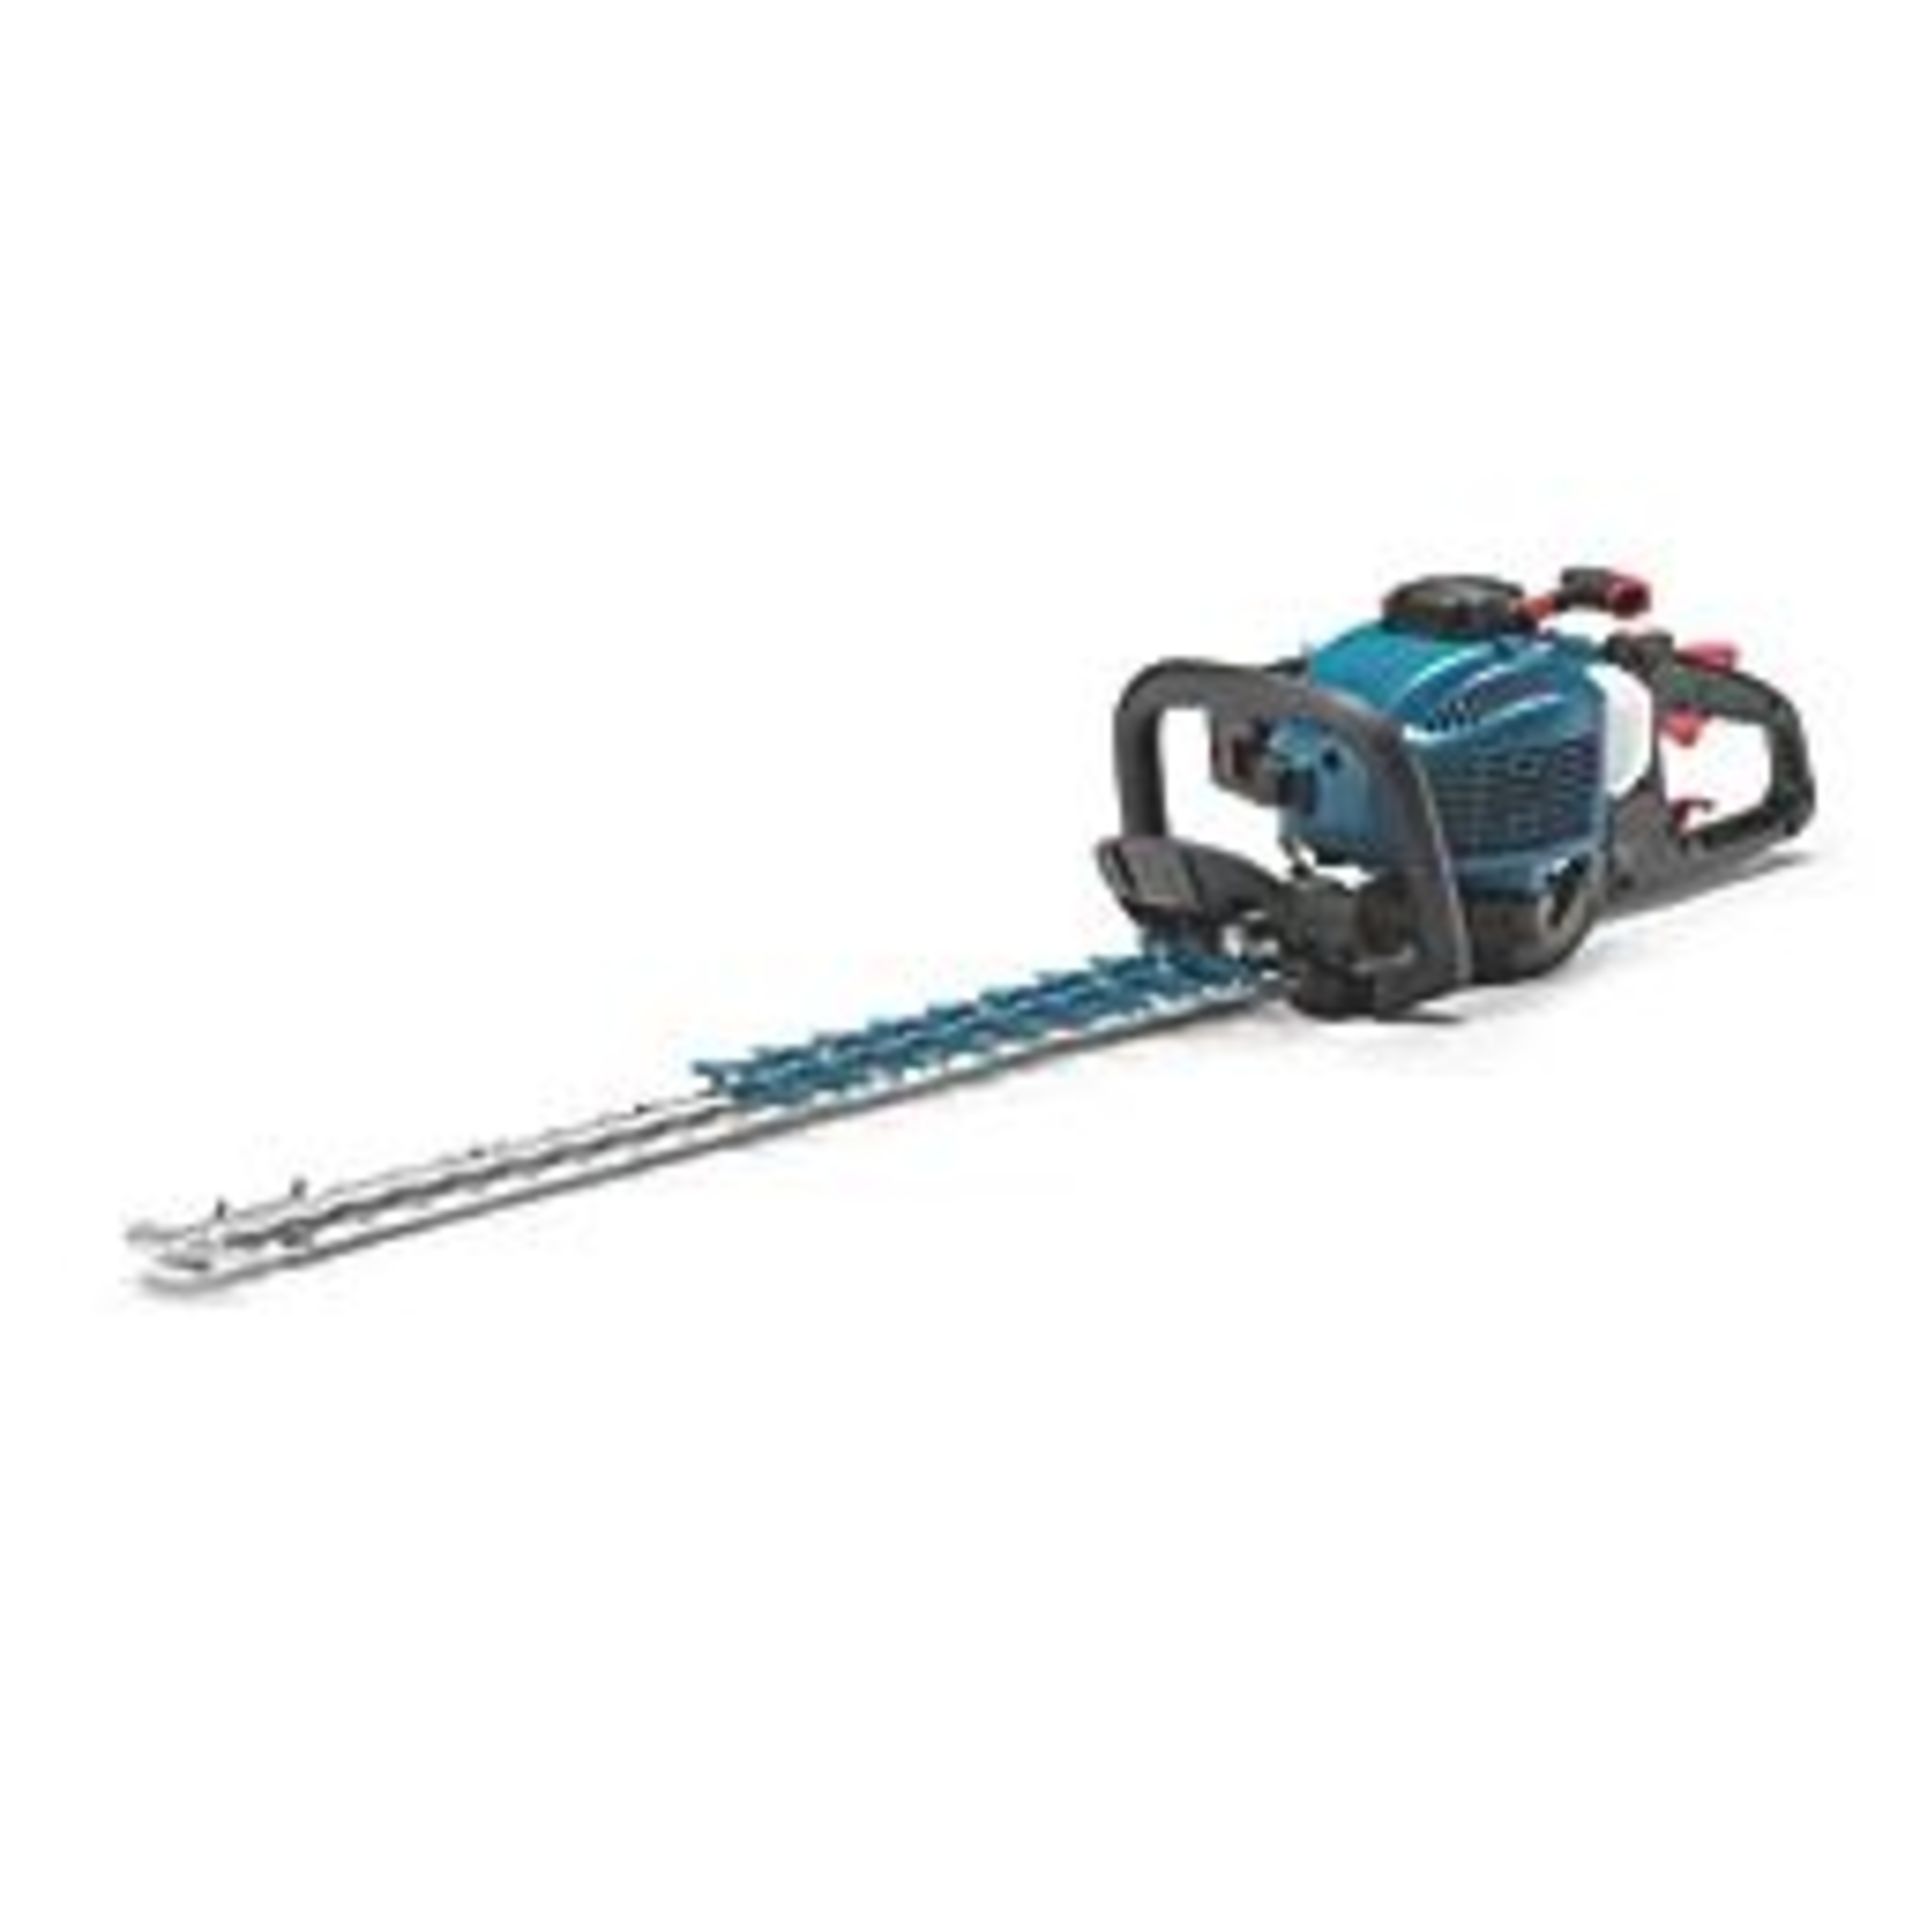 ERBAUER EHTP22 69CM 22.2CC HEDGE TRIMMER. - R13a.6. High performance hedge trimmer specified to meet